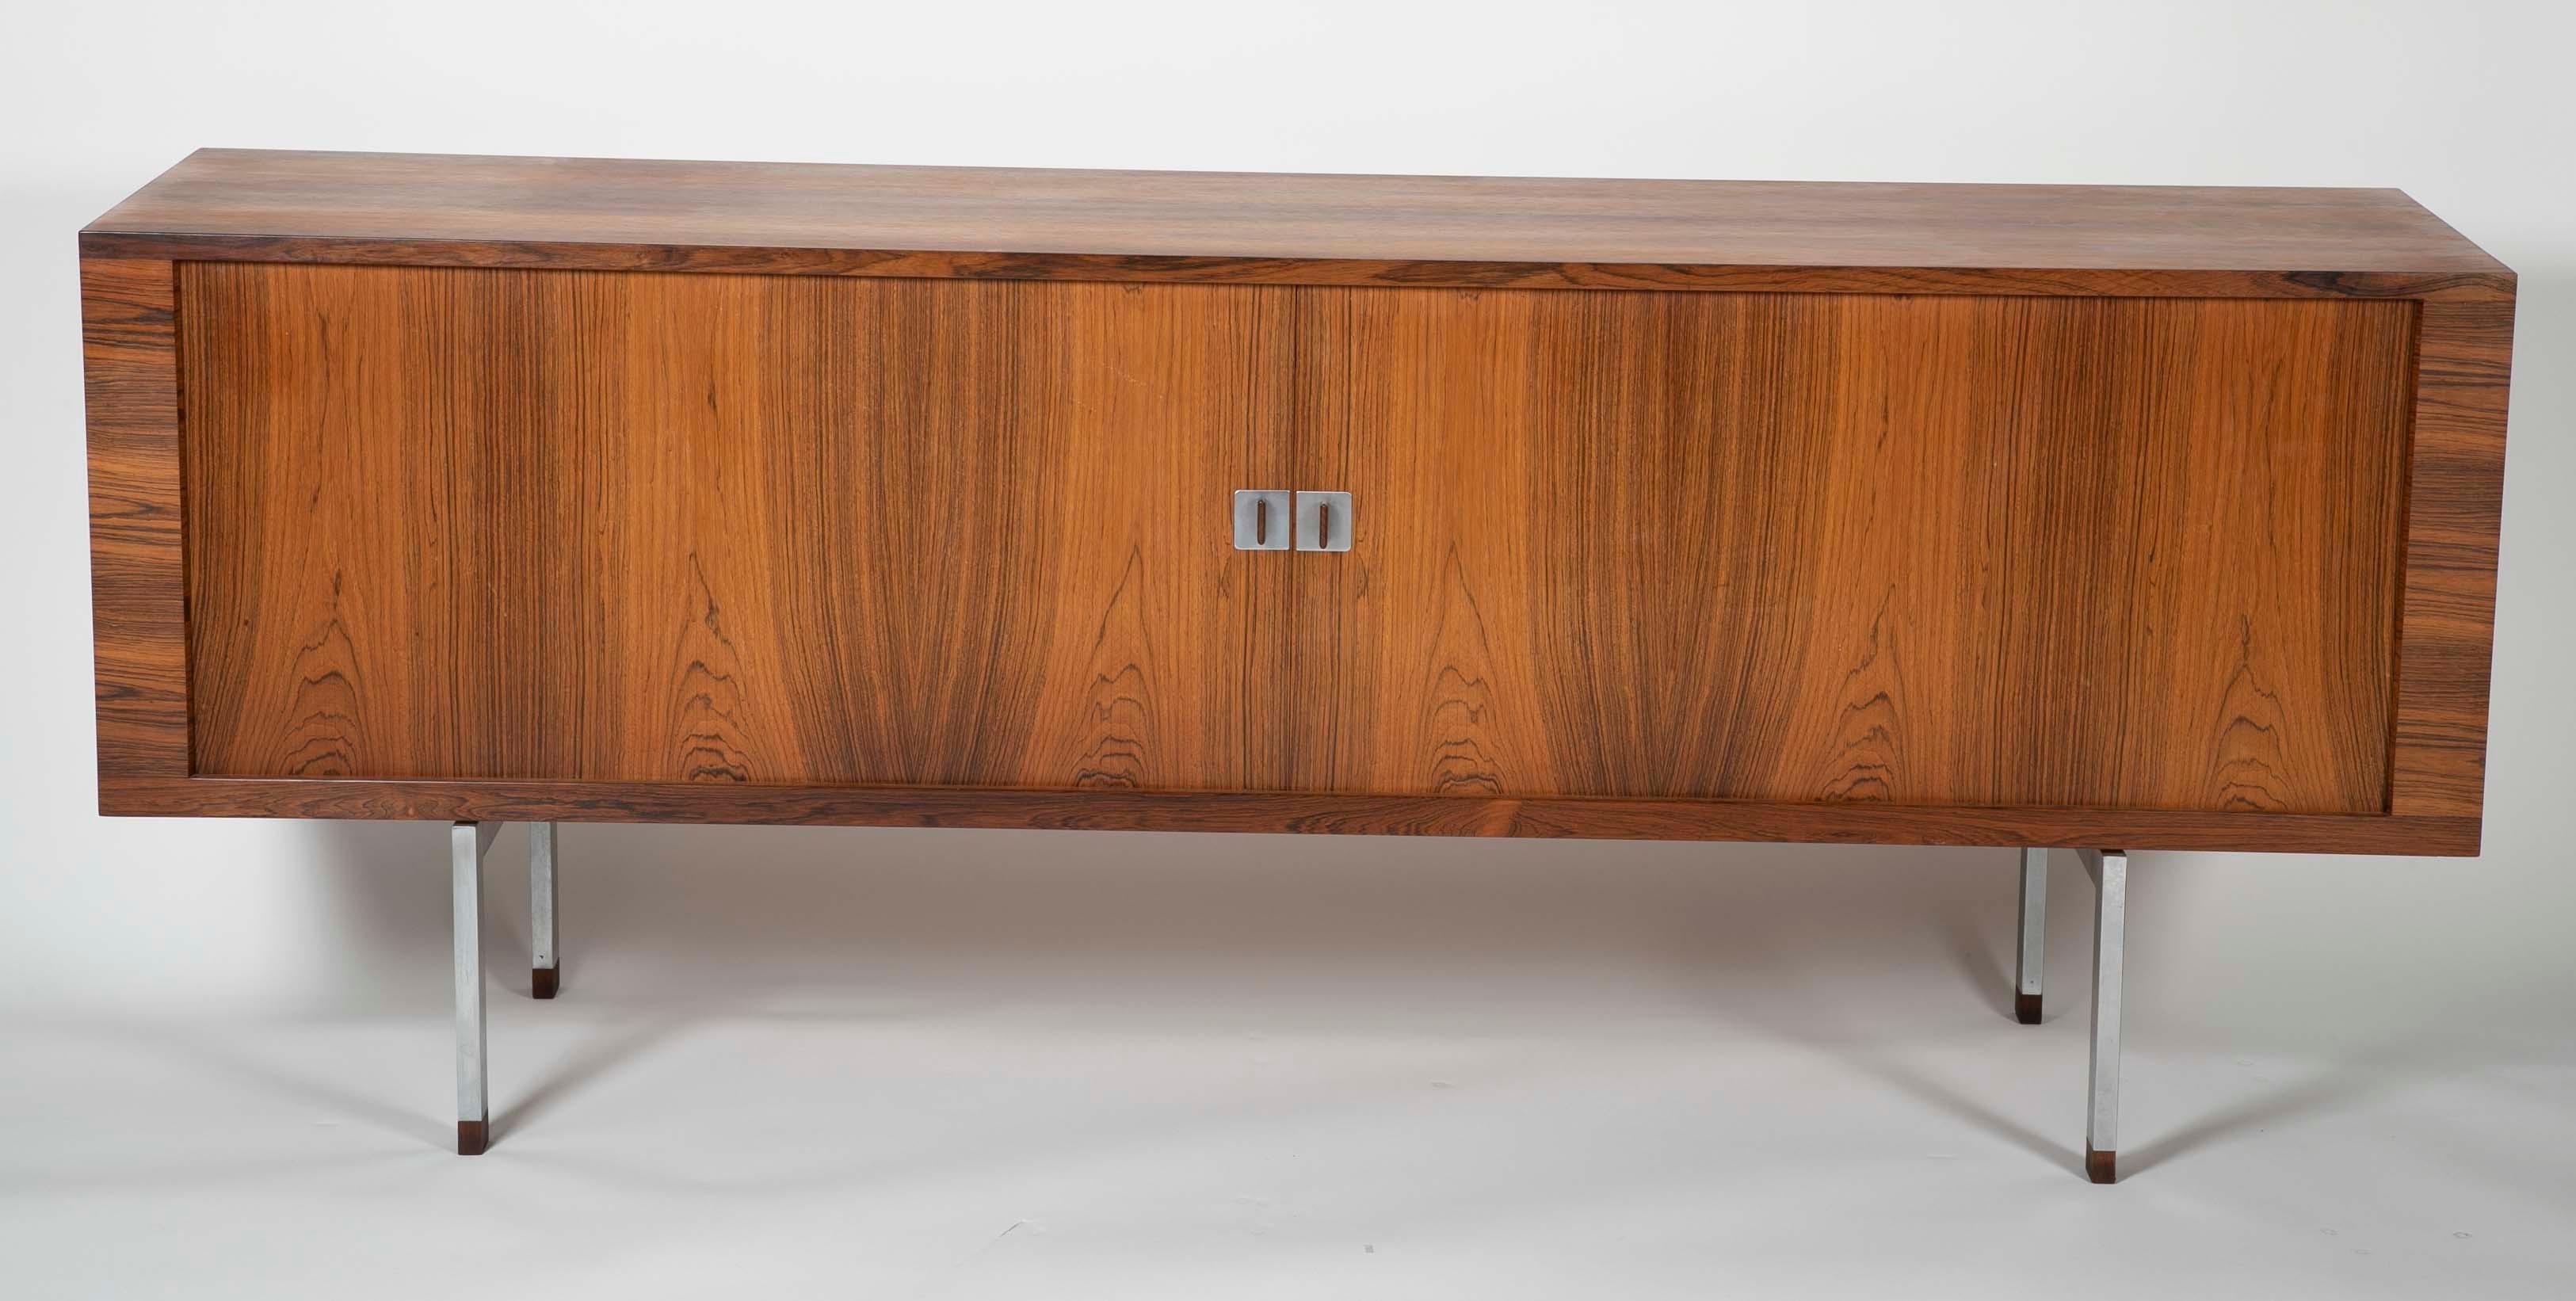 A Hans Wegner rosewood and white oak cabinet having a matte-chromed steel base. The cabinet opens using a pair of tambour doors. Manufactured by R&Y Mobler.
 